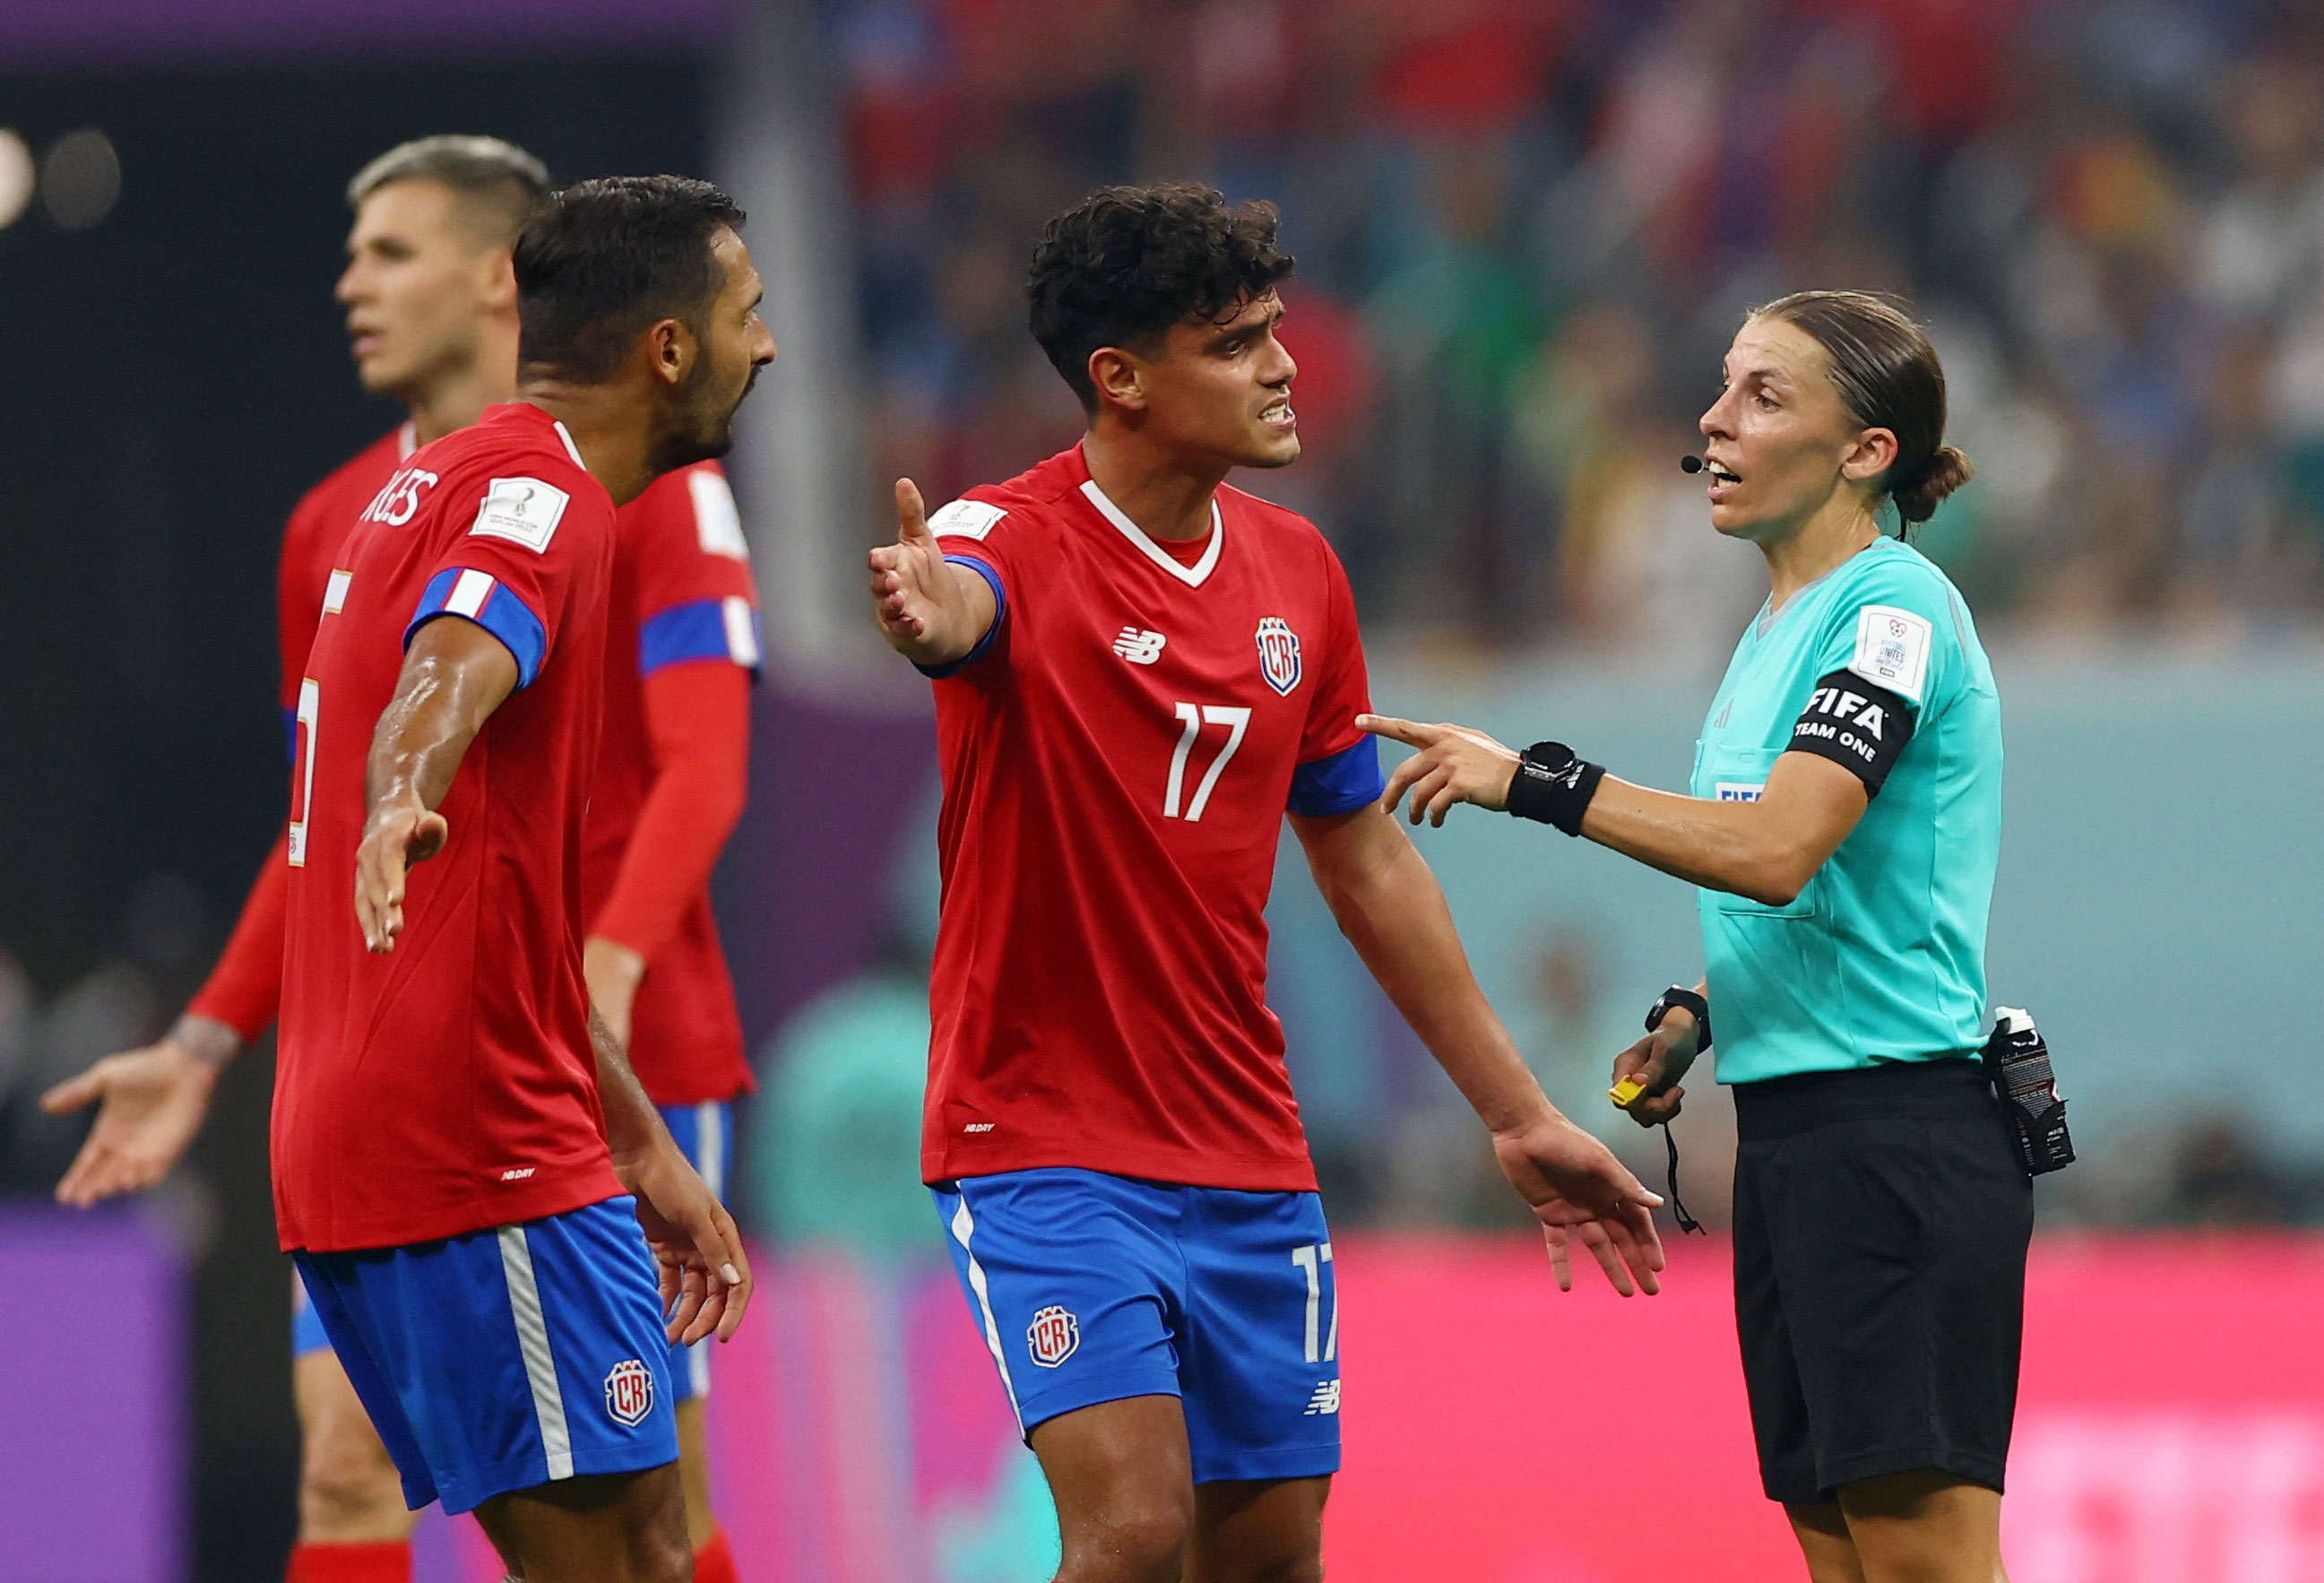 Costa Rica's Yeltsin Tejeda argues with Frappart.